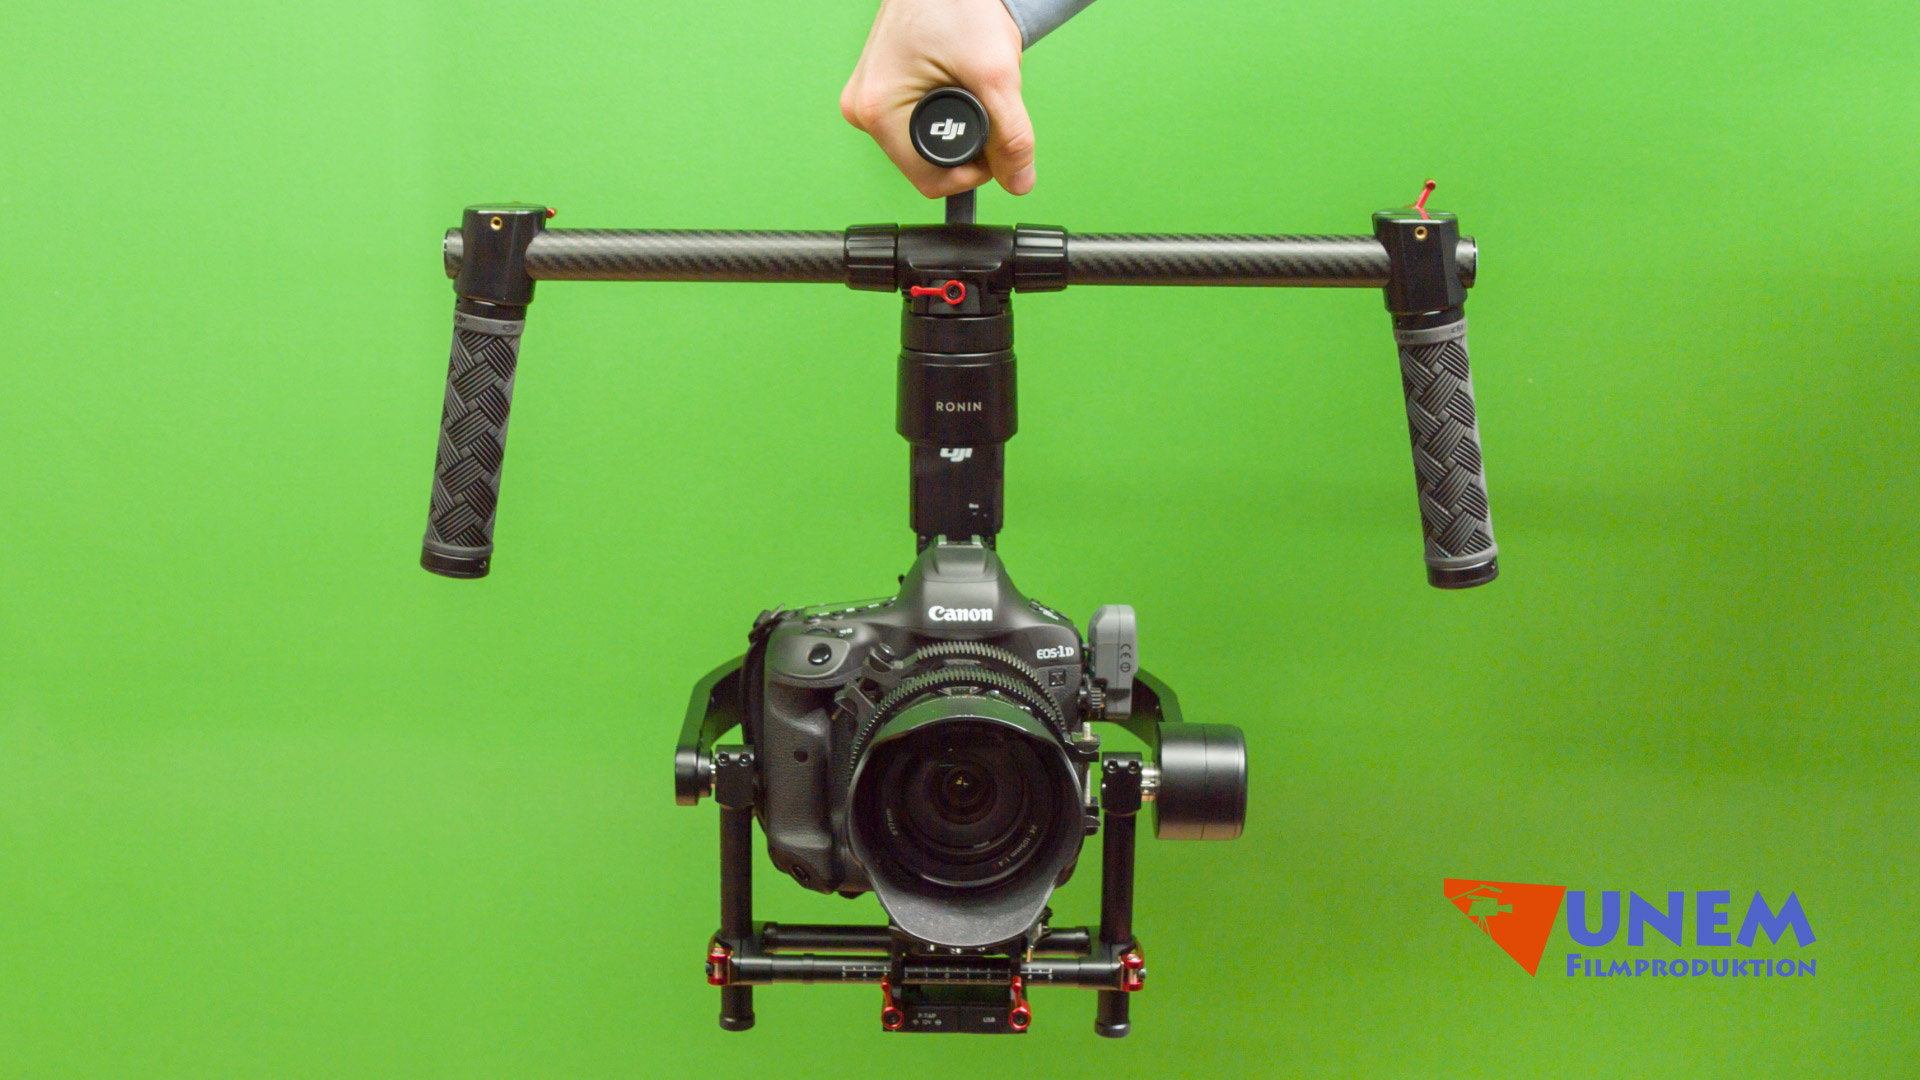 Gimbal Ronin M and 1dxmk2 with 24-105mm lens